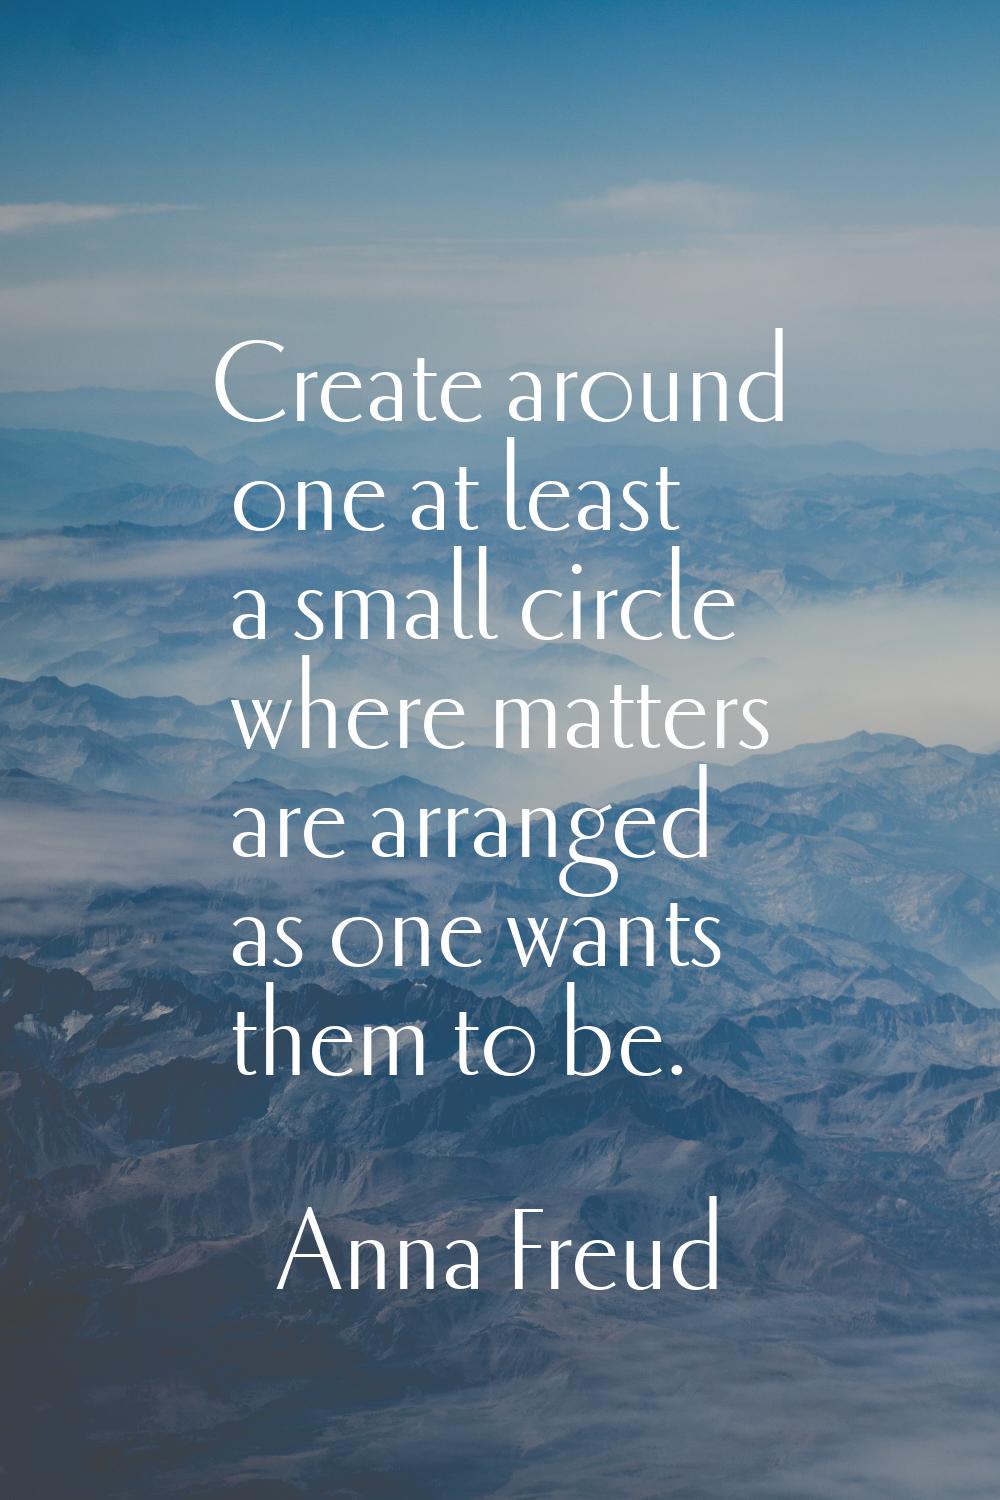 Create around one at least a small circle where matters are arranged as one wants them to be.